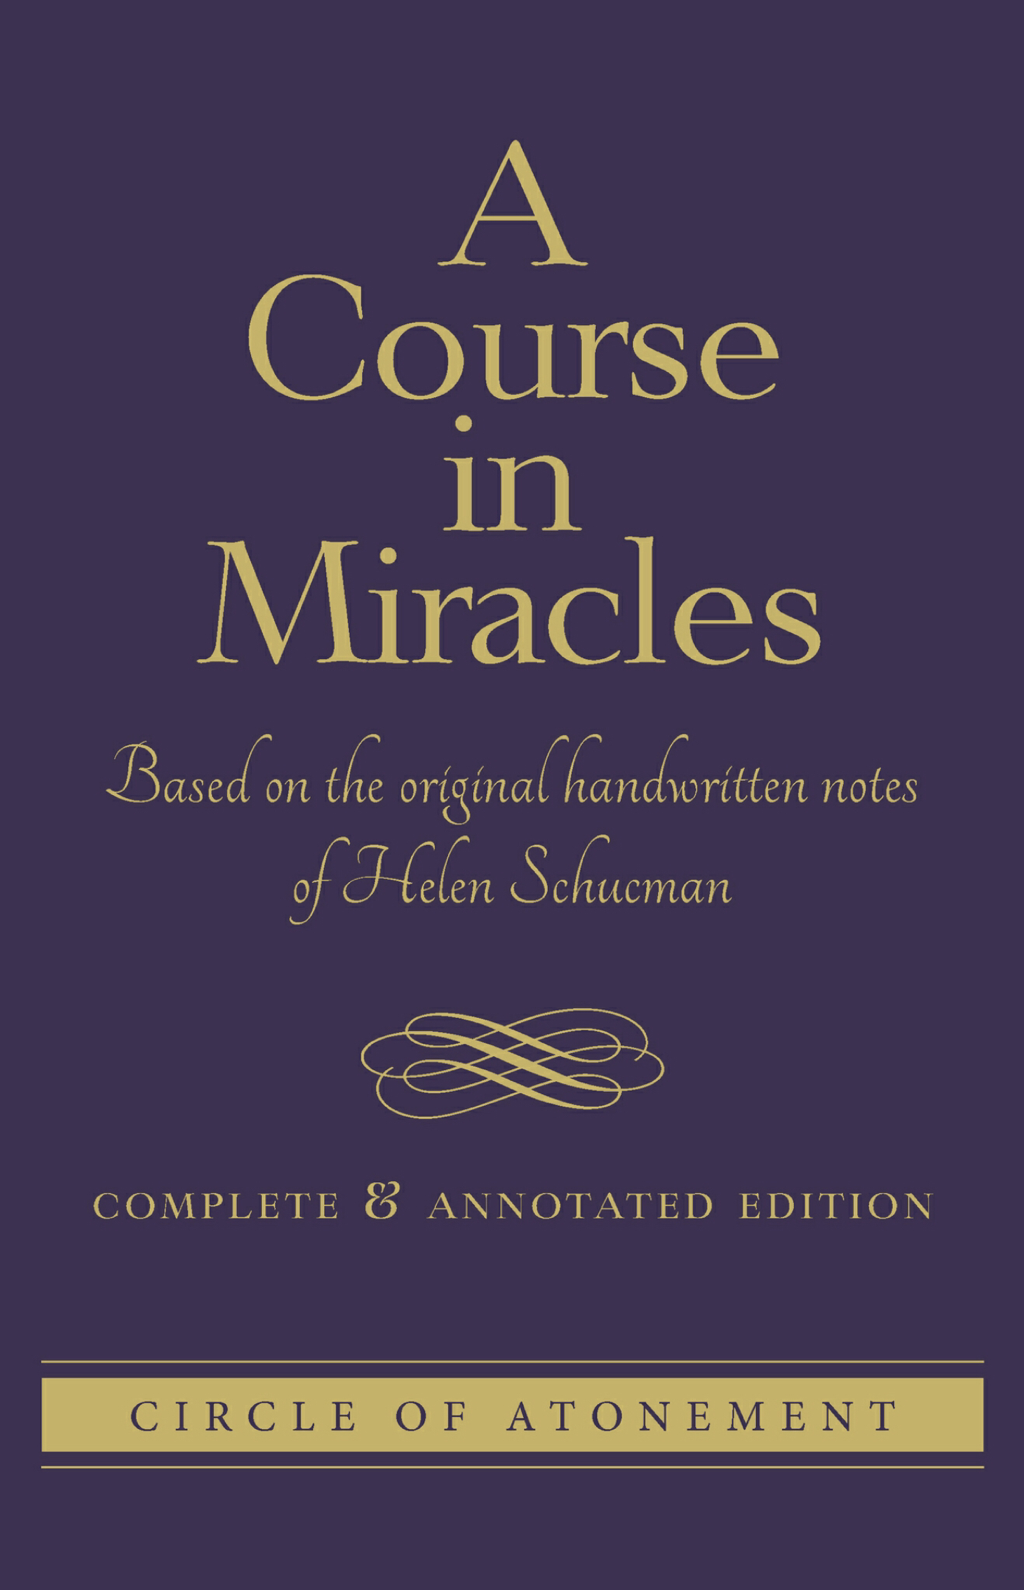 A Group to Explore ‘More Than an Introduction to A Course in Miracles’